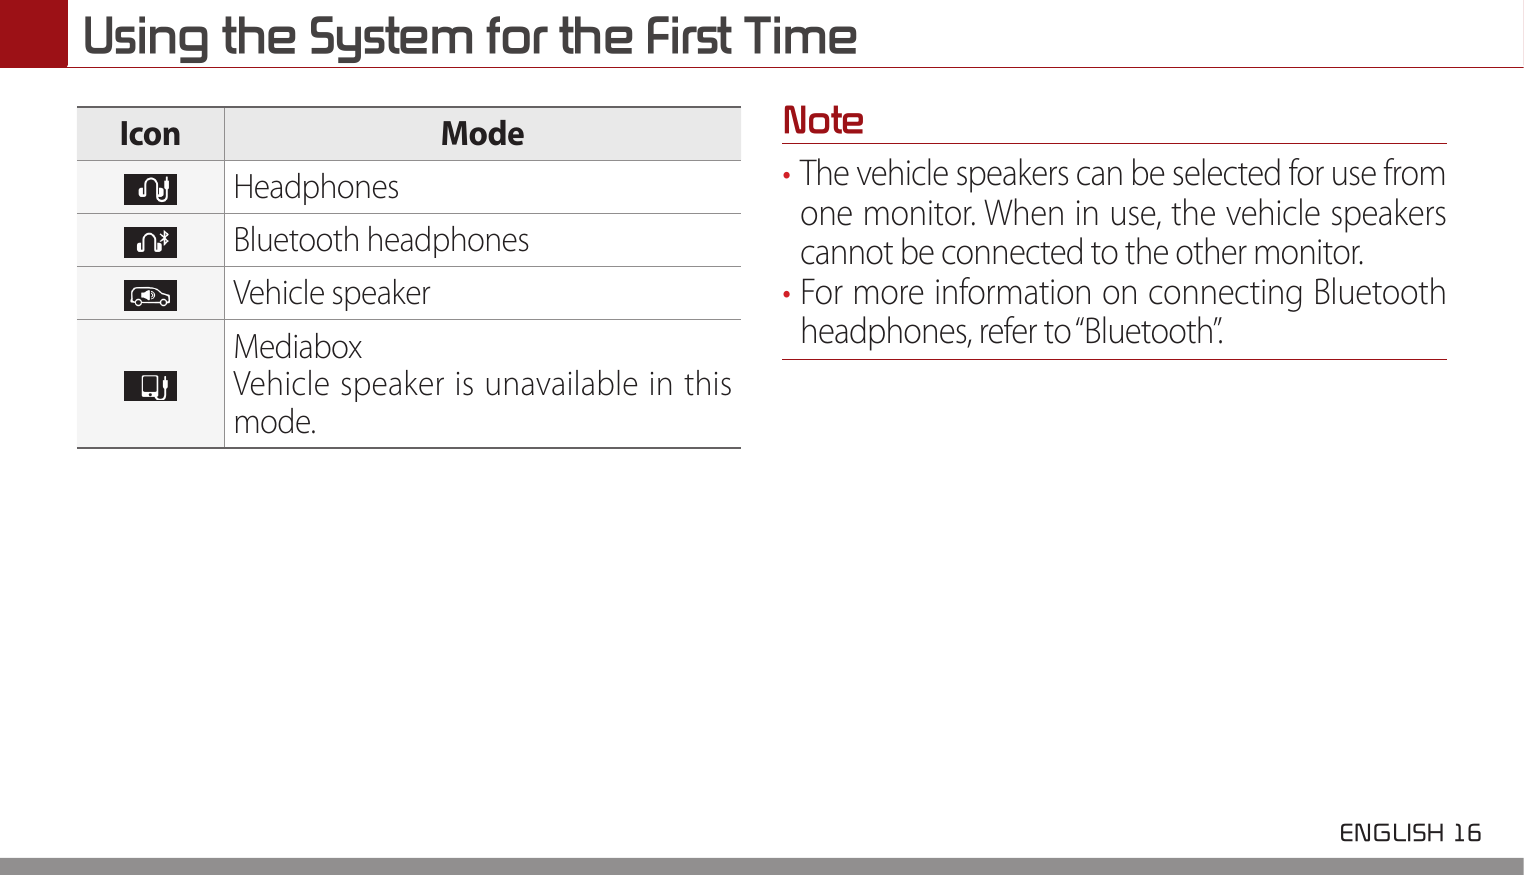 Using the System for the First Time ENGLISH 16 Icon ModeHeadphonesBluetooth headphonesVehicle speakerMediaboxVehicle speaker is unavailable in this mode.Note• The vehicle speakers can be selected for use from one monitor. When in use, the vehicle speakers cannot be connected to the other monitor.• For more information on connecting Bluetooth headphones, refer to “Bluetooth”.